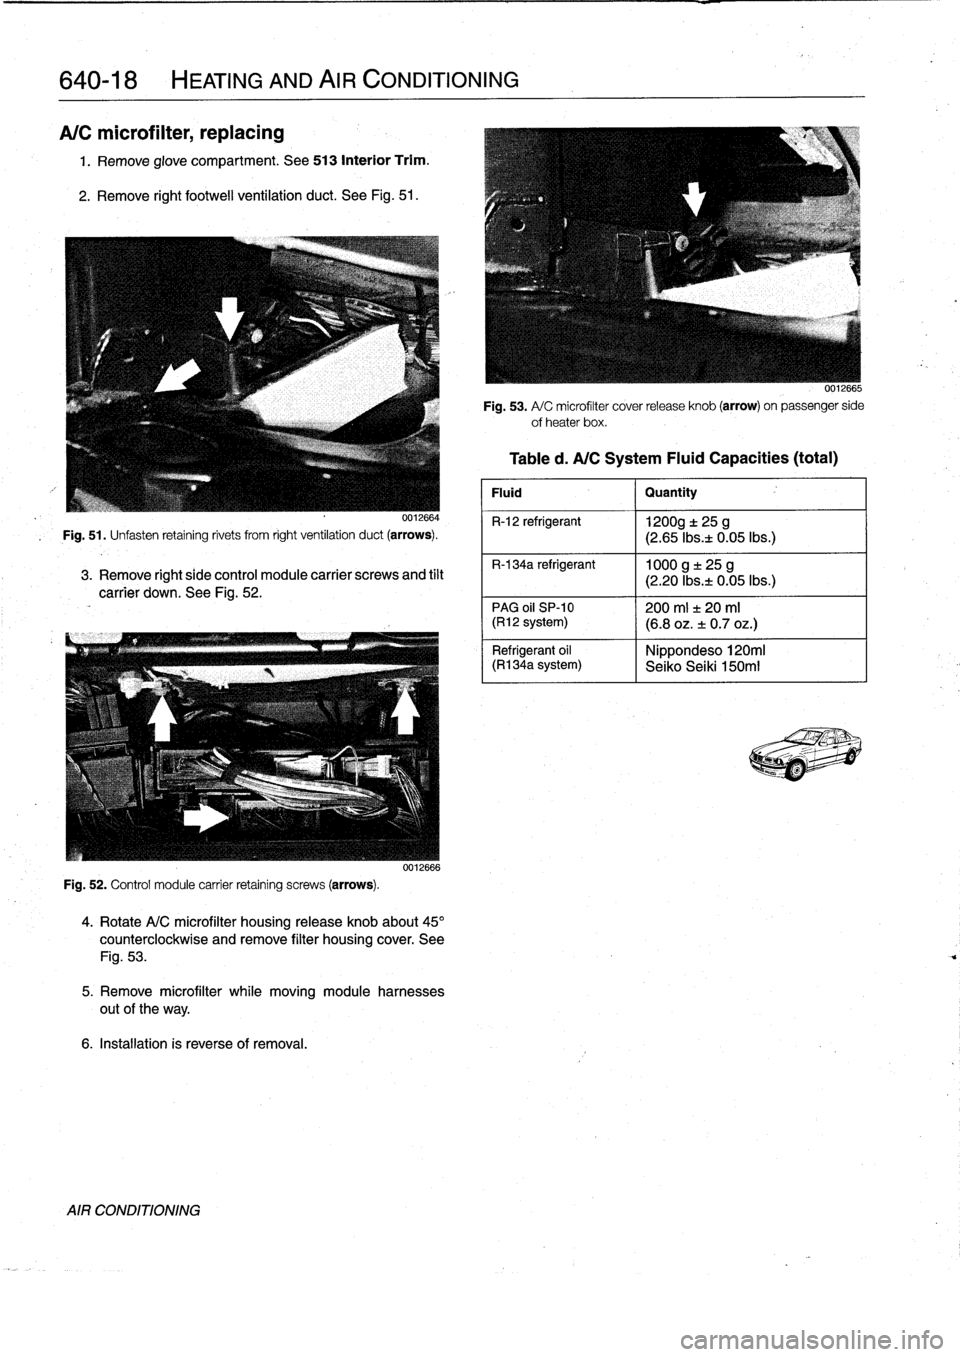 BMW 328i 1998 E36 Owners Manual 
640-18

	

HEATING
AND
AIR
CONDITIONING

A/C
microfilter,
replacing

1
.
Remove
glove
compartment
.
See
513
Interior
Trim
.

2
.
Remove
right
footwell
ventilation
duct
.
See
Fig
.
51
.

0012664

Fig
